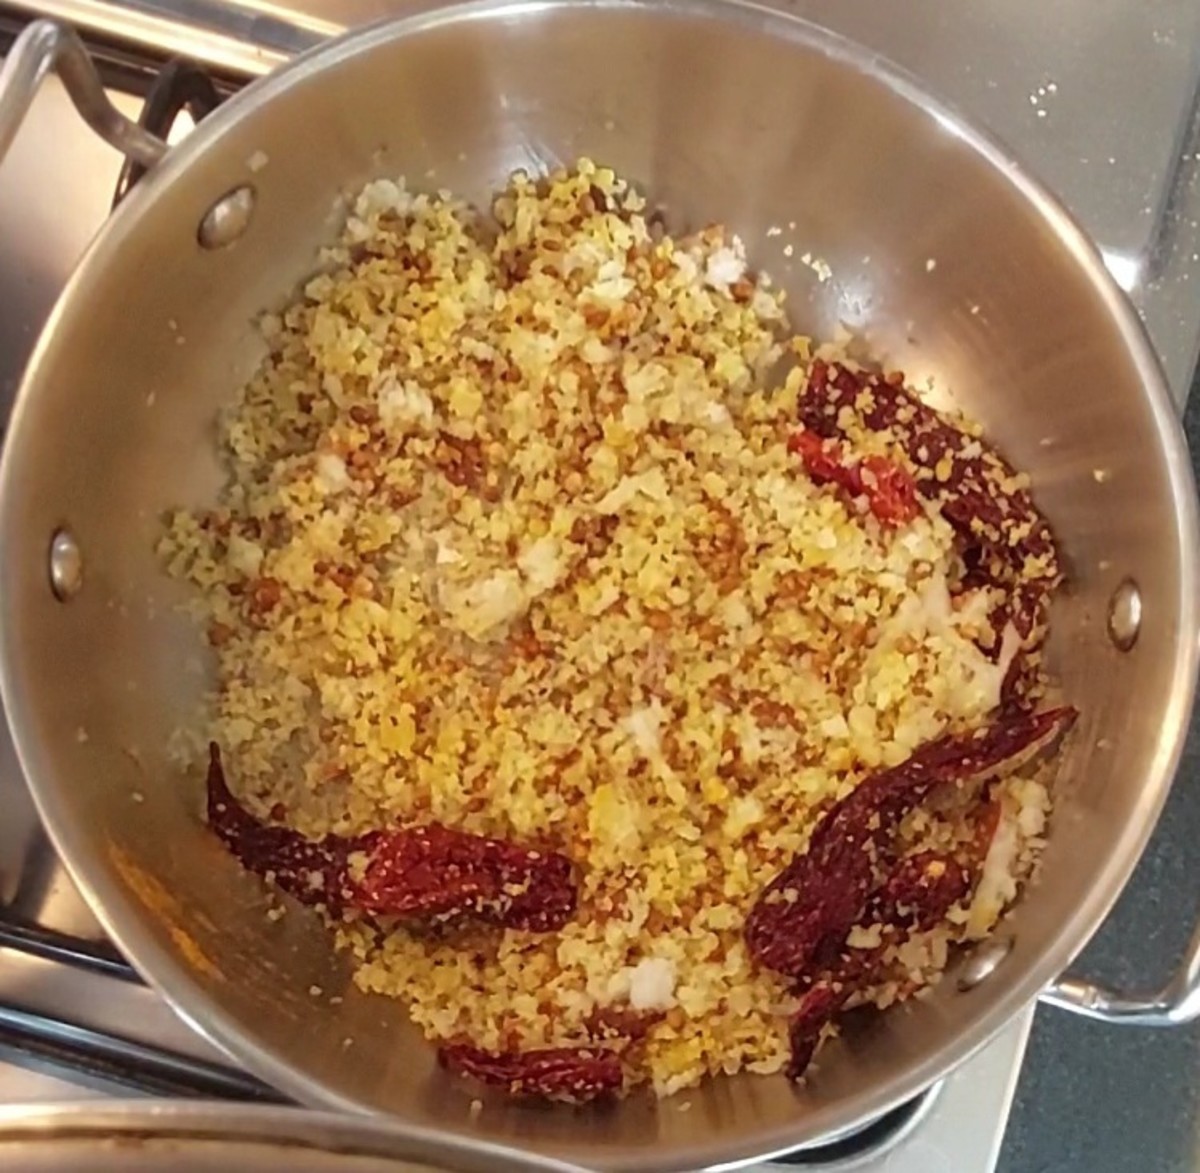 Add 1 cup grated coconut and 1/4 teaspoon turmeric powder. Mix well and switch off the flame. Let the mixture cool down.